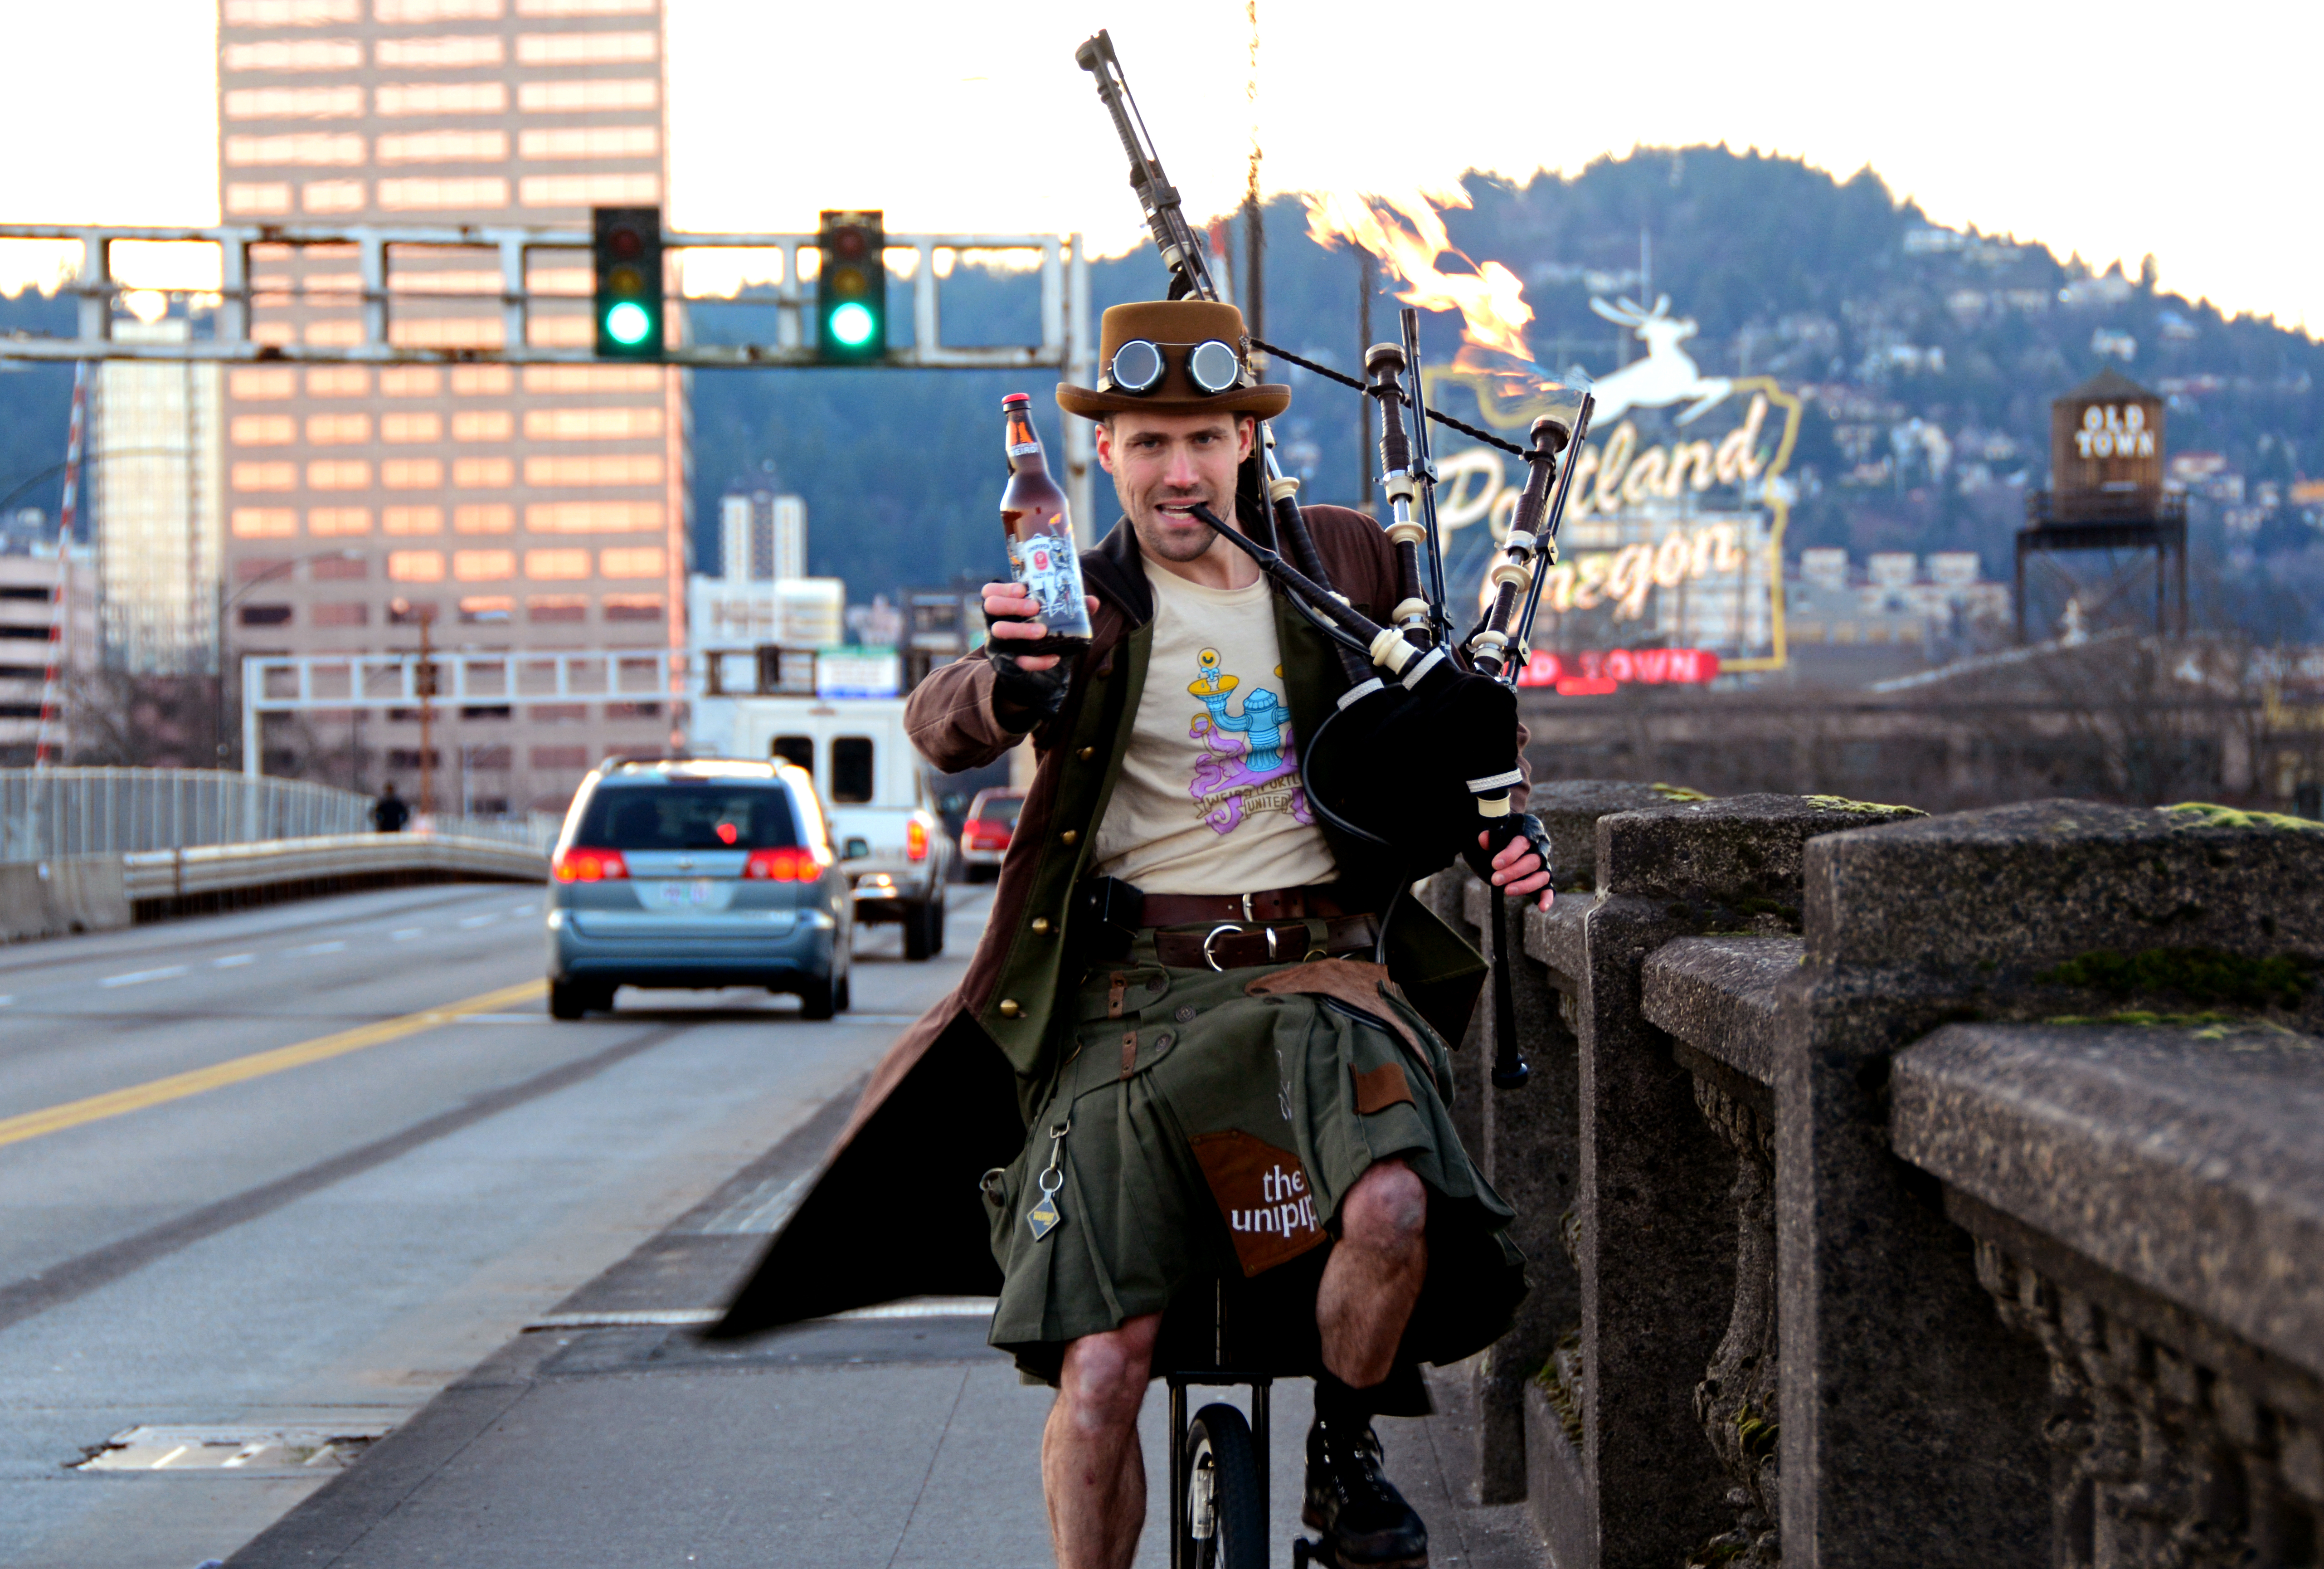 The Unipiper with Portland Brewing bottle. (image courtesy of Portland Brewing)